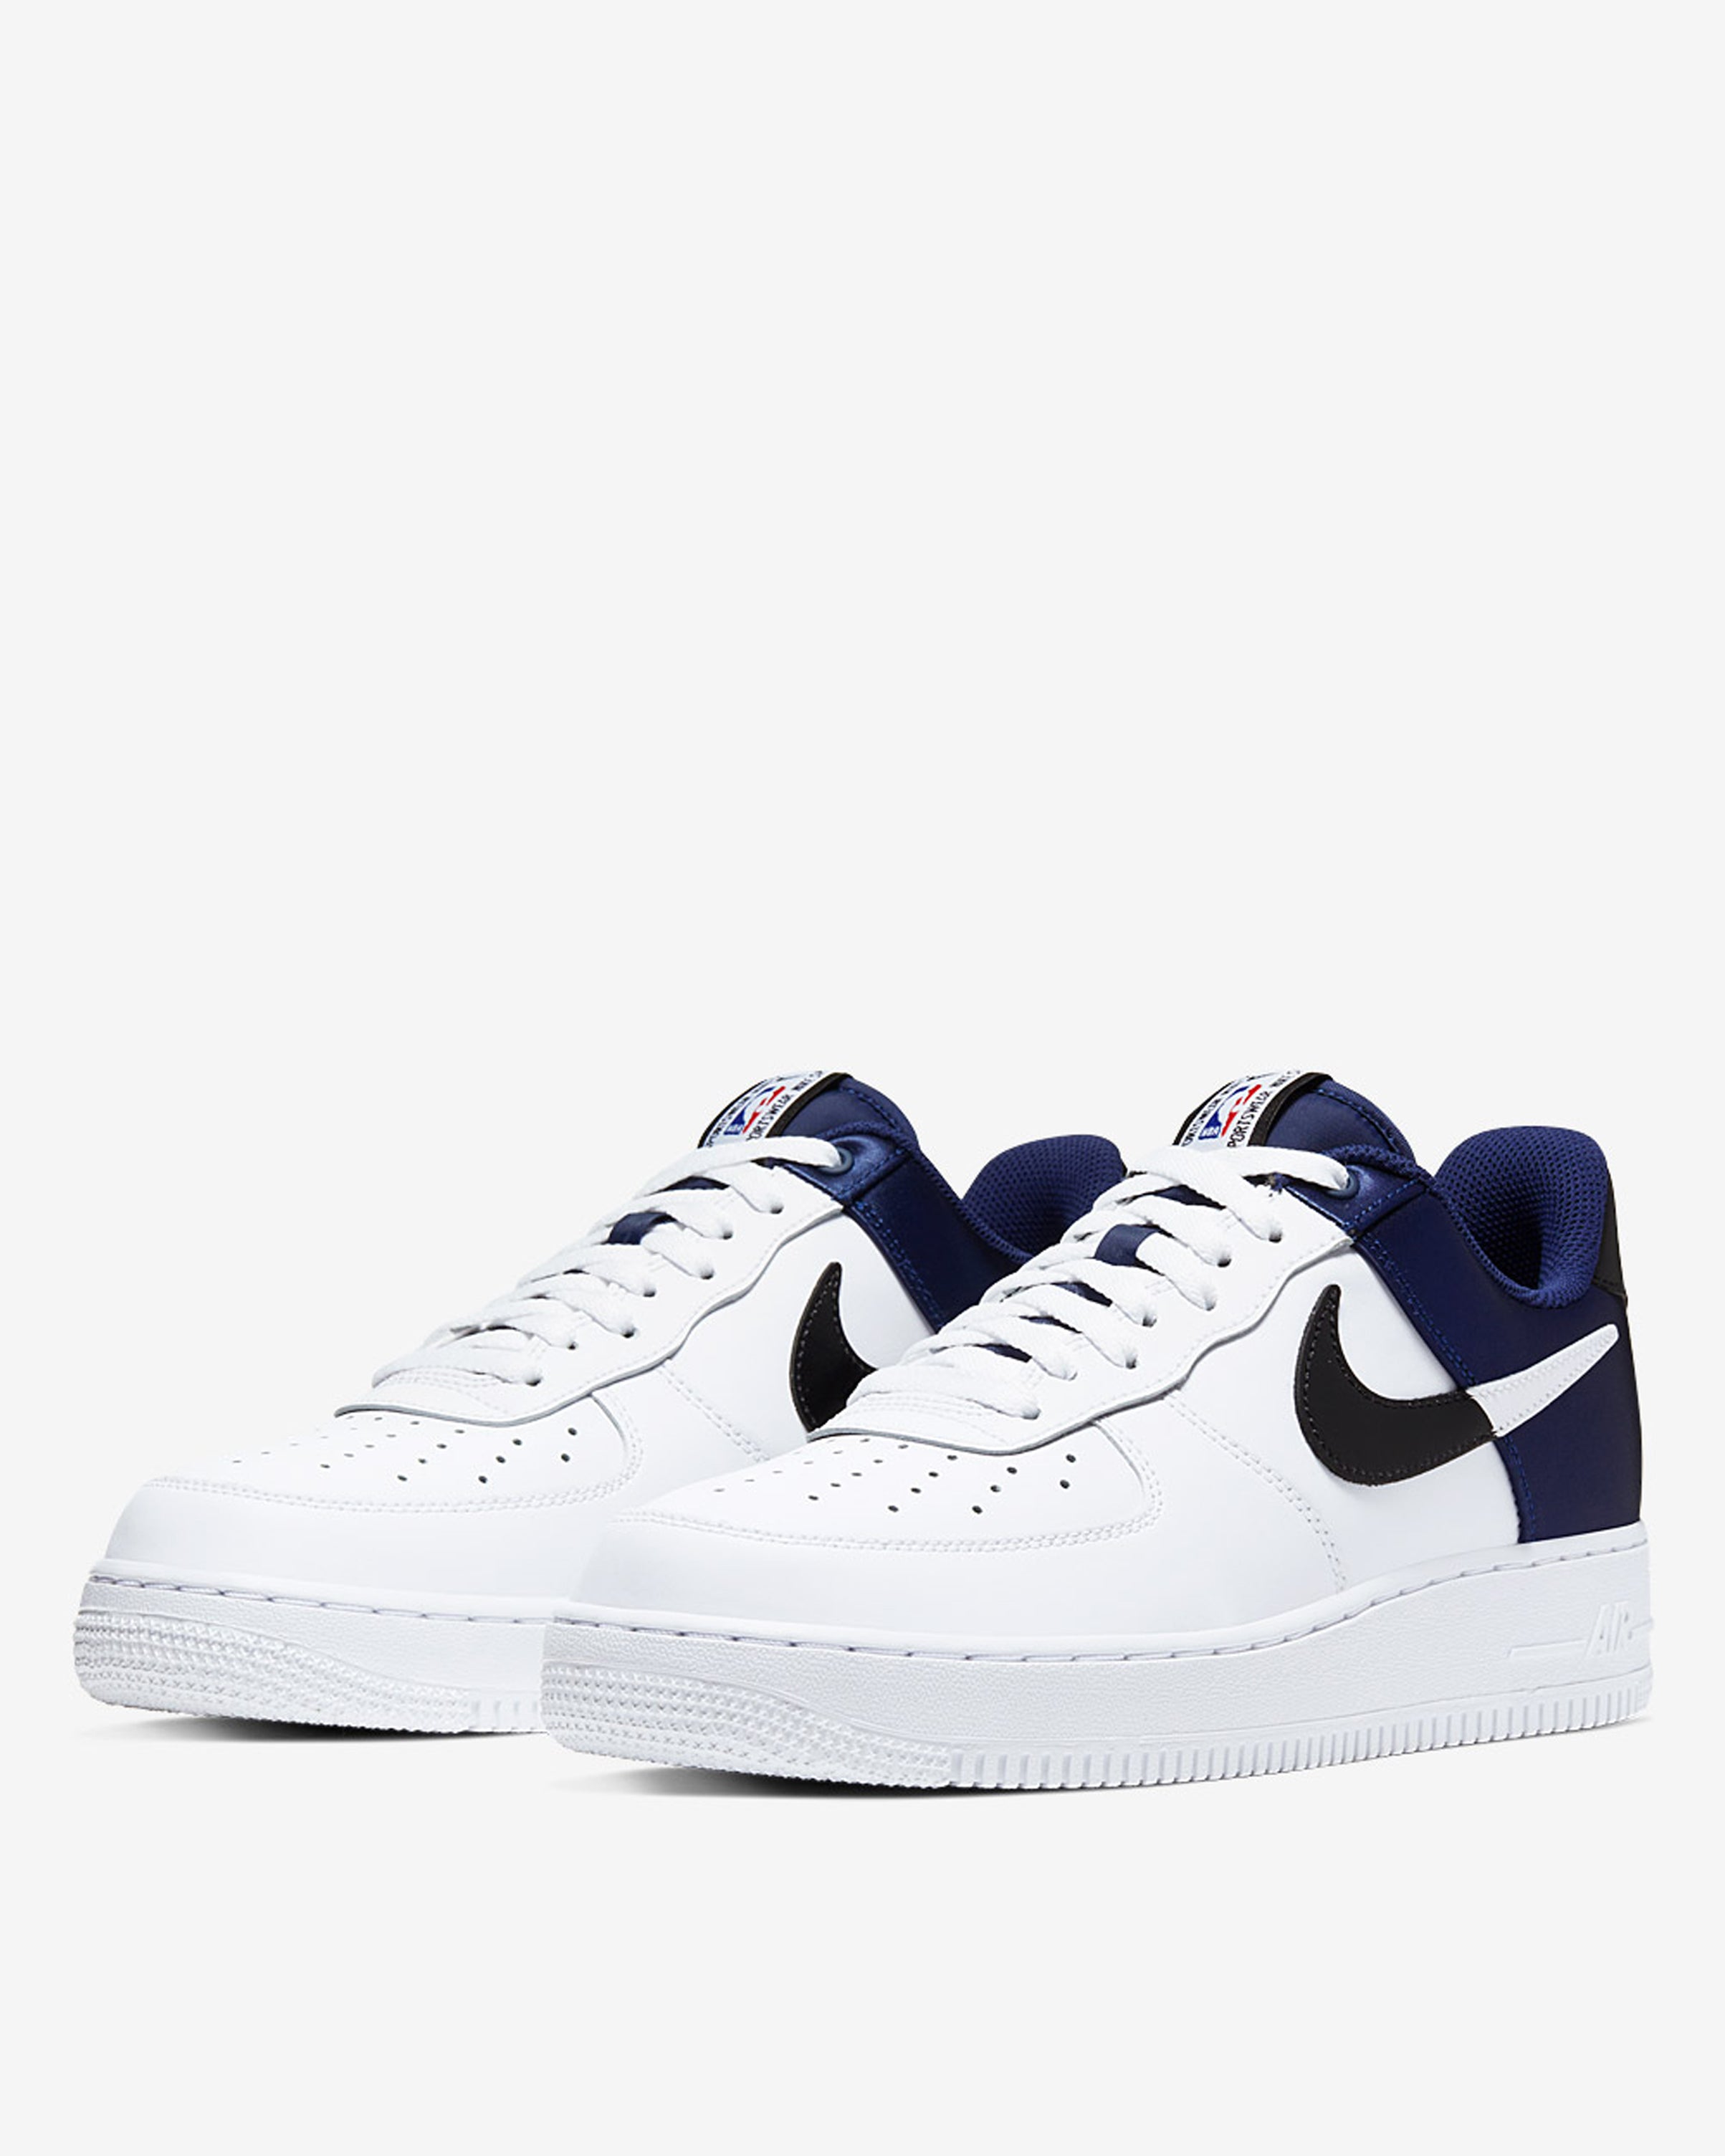 Nike Air Force 1 '07 LV8 Midnight Navy/White